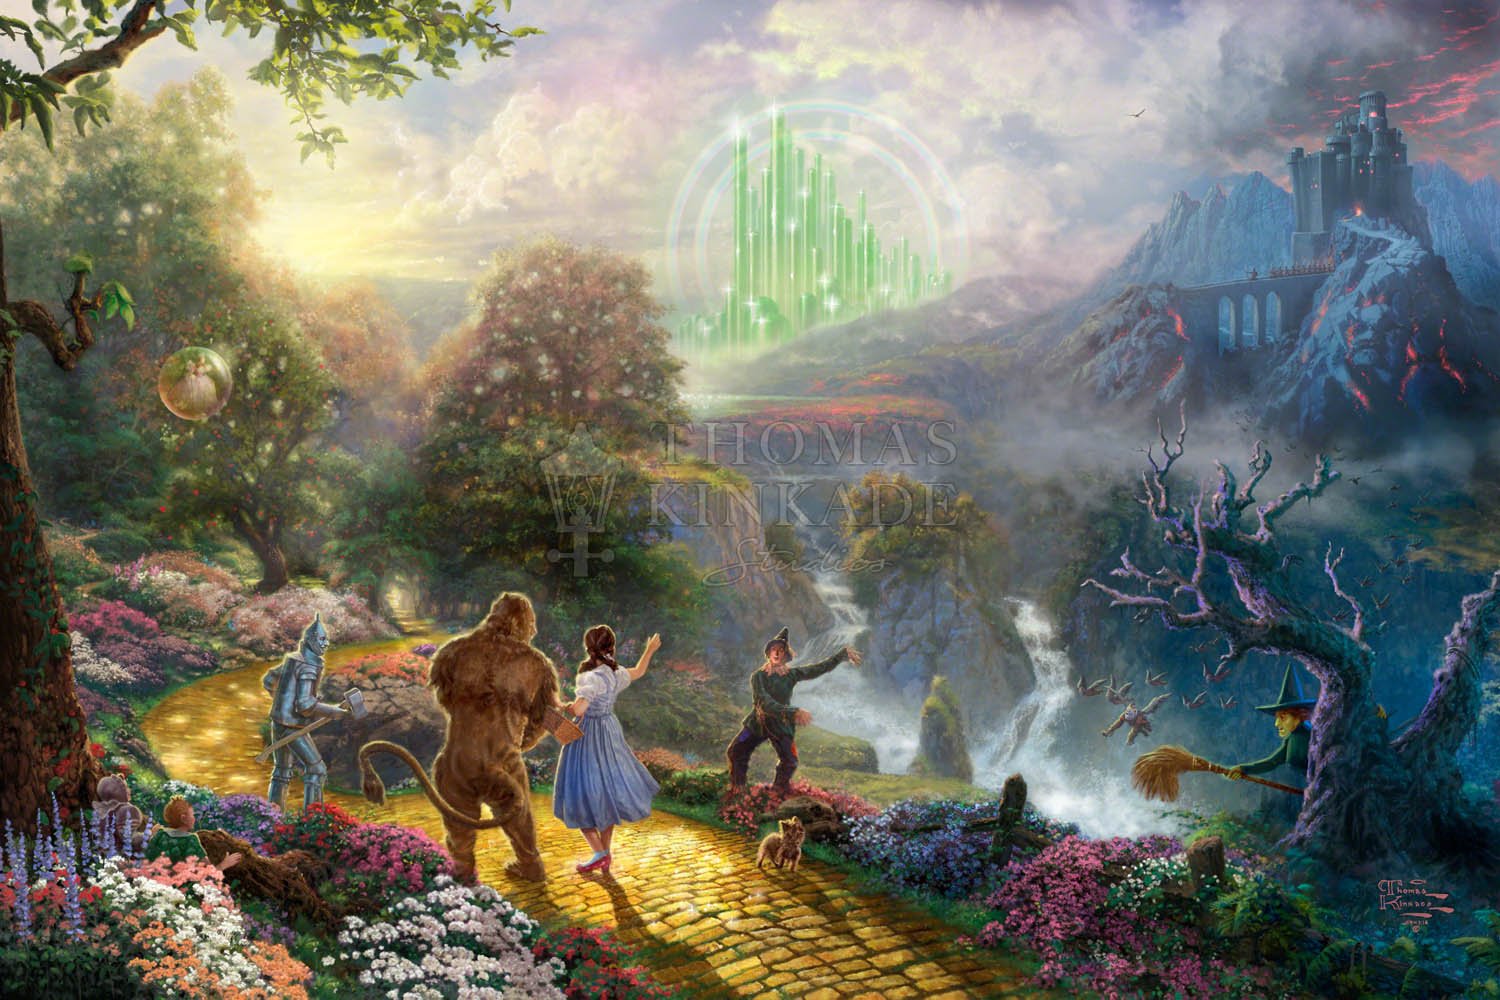 Emerald City The Wizard of Oz